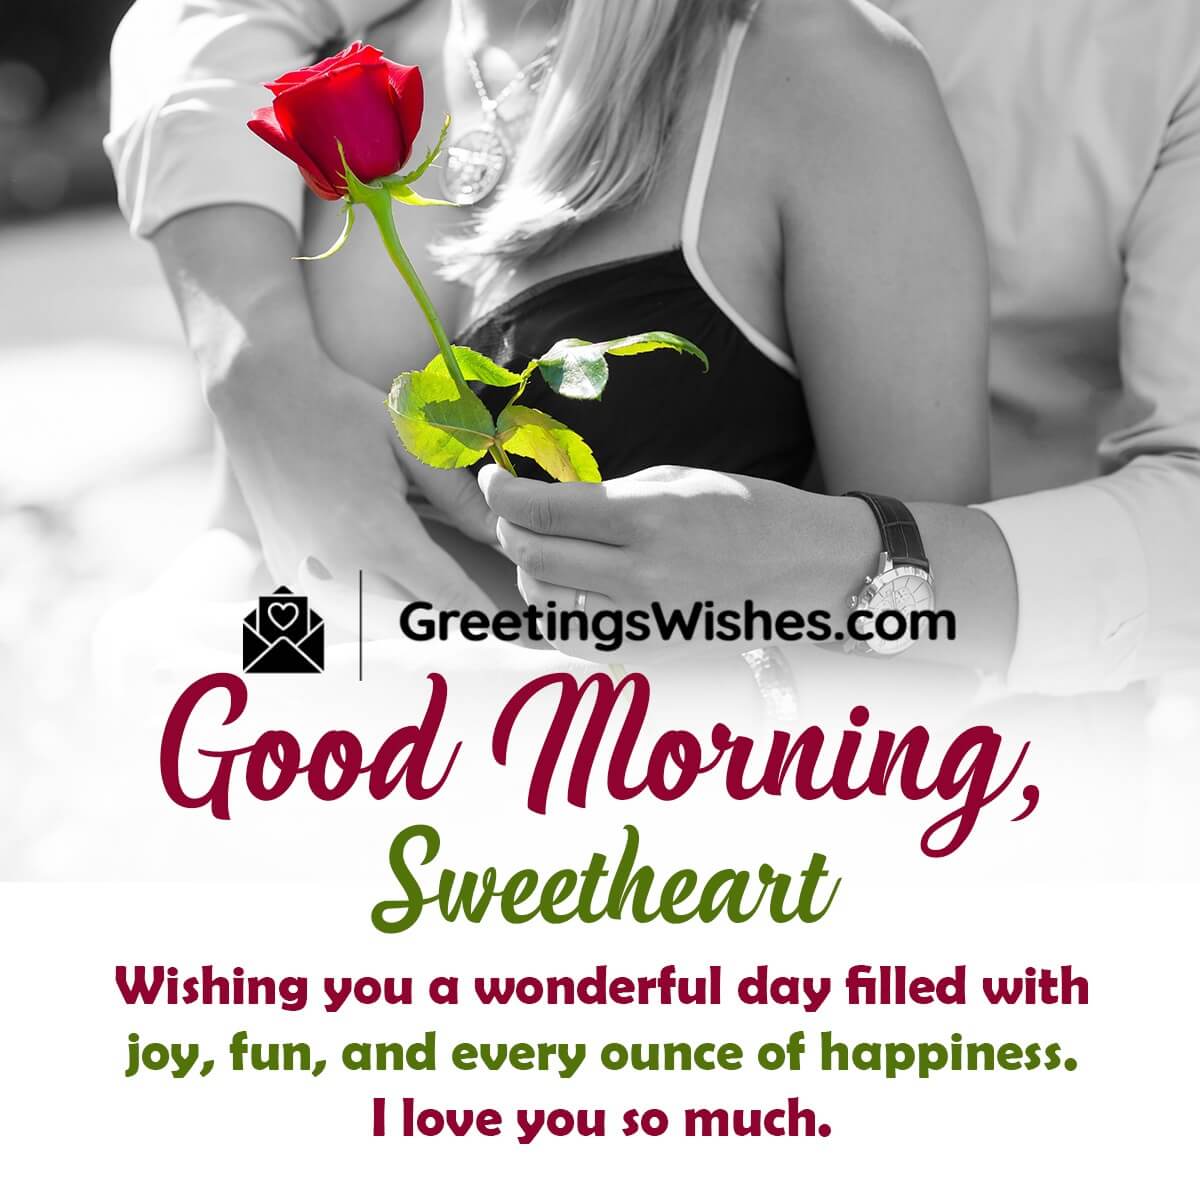 Good Morning Love Messages and Wishes - Greetings Wishes